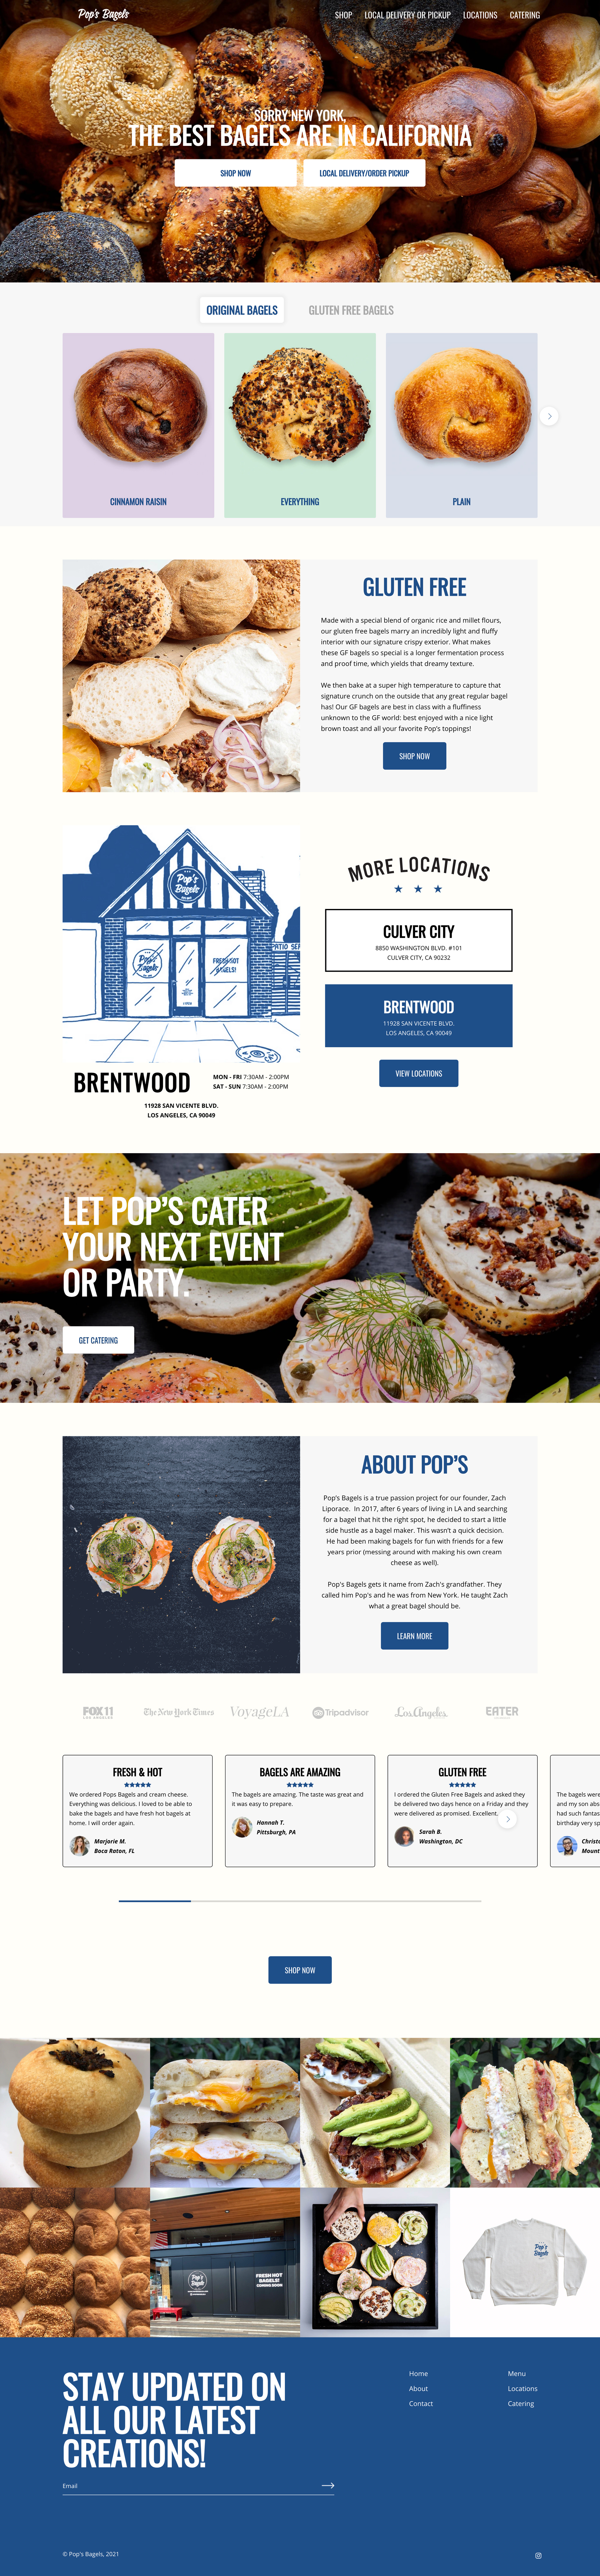 Pop's Bagels - Home Page